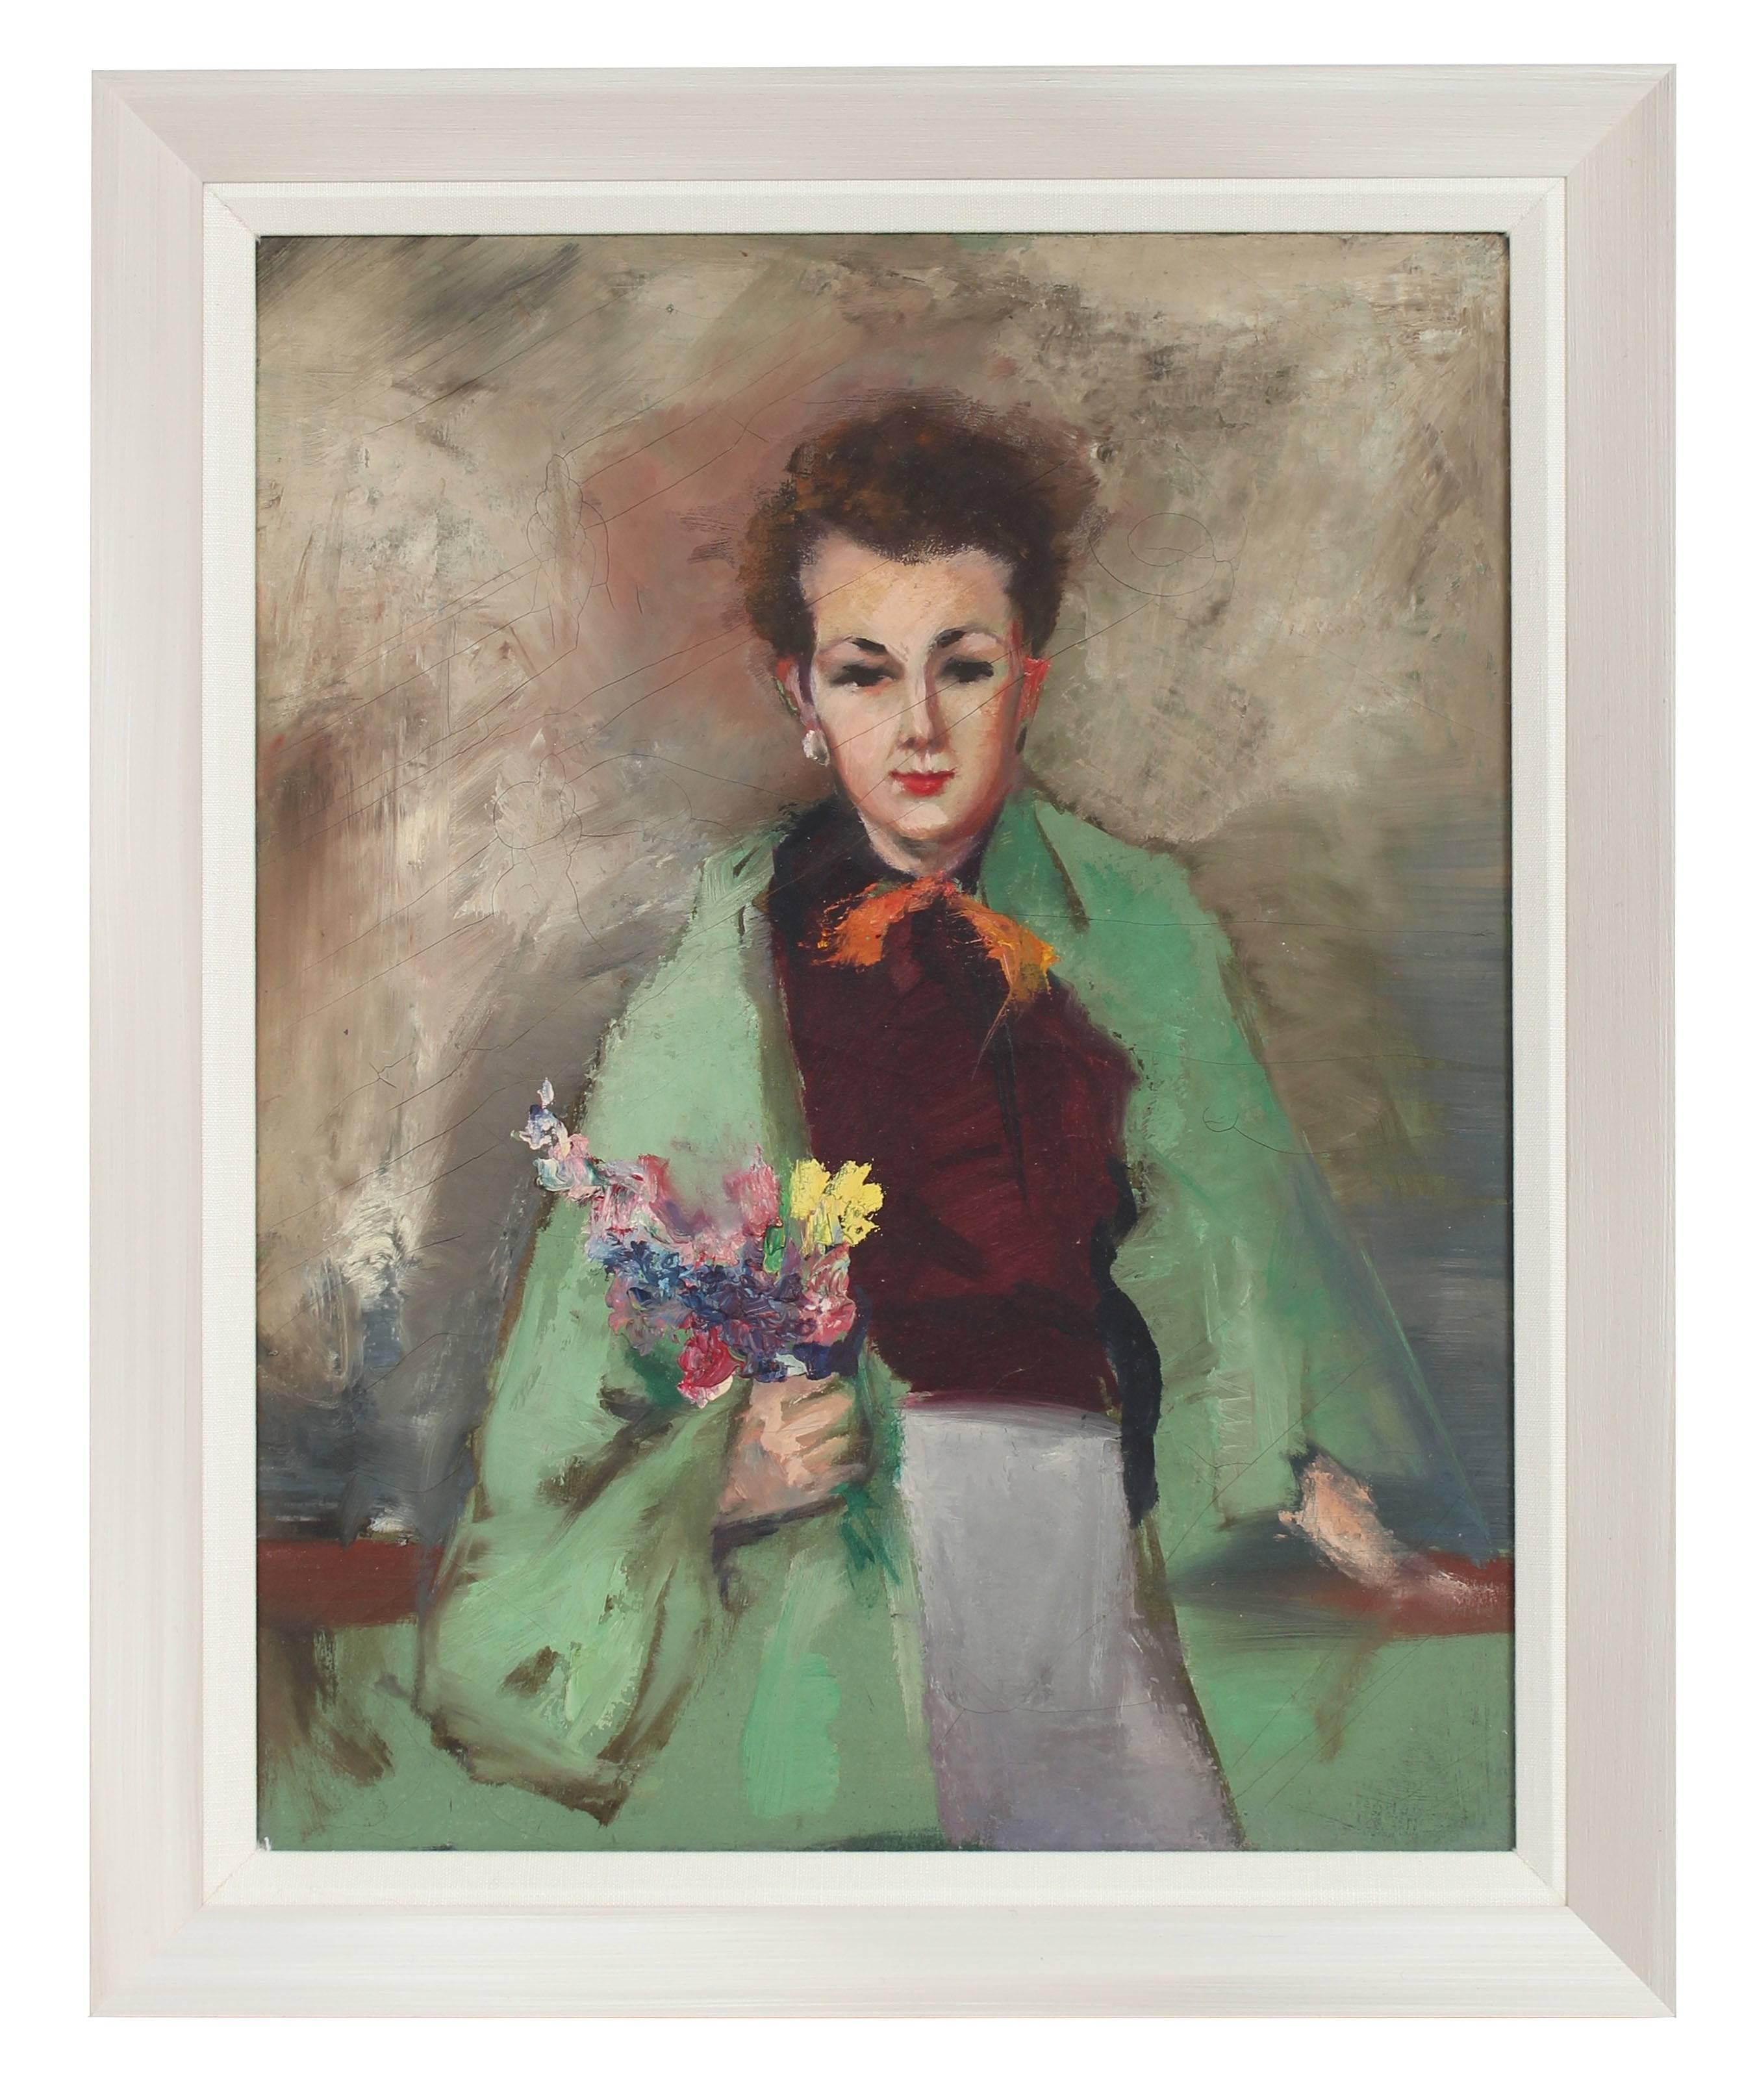 Morris Kronfeld Portrait Painting - Mid Century Portrait of a Woman in Green, Oil on Canvas Painting